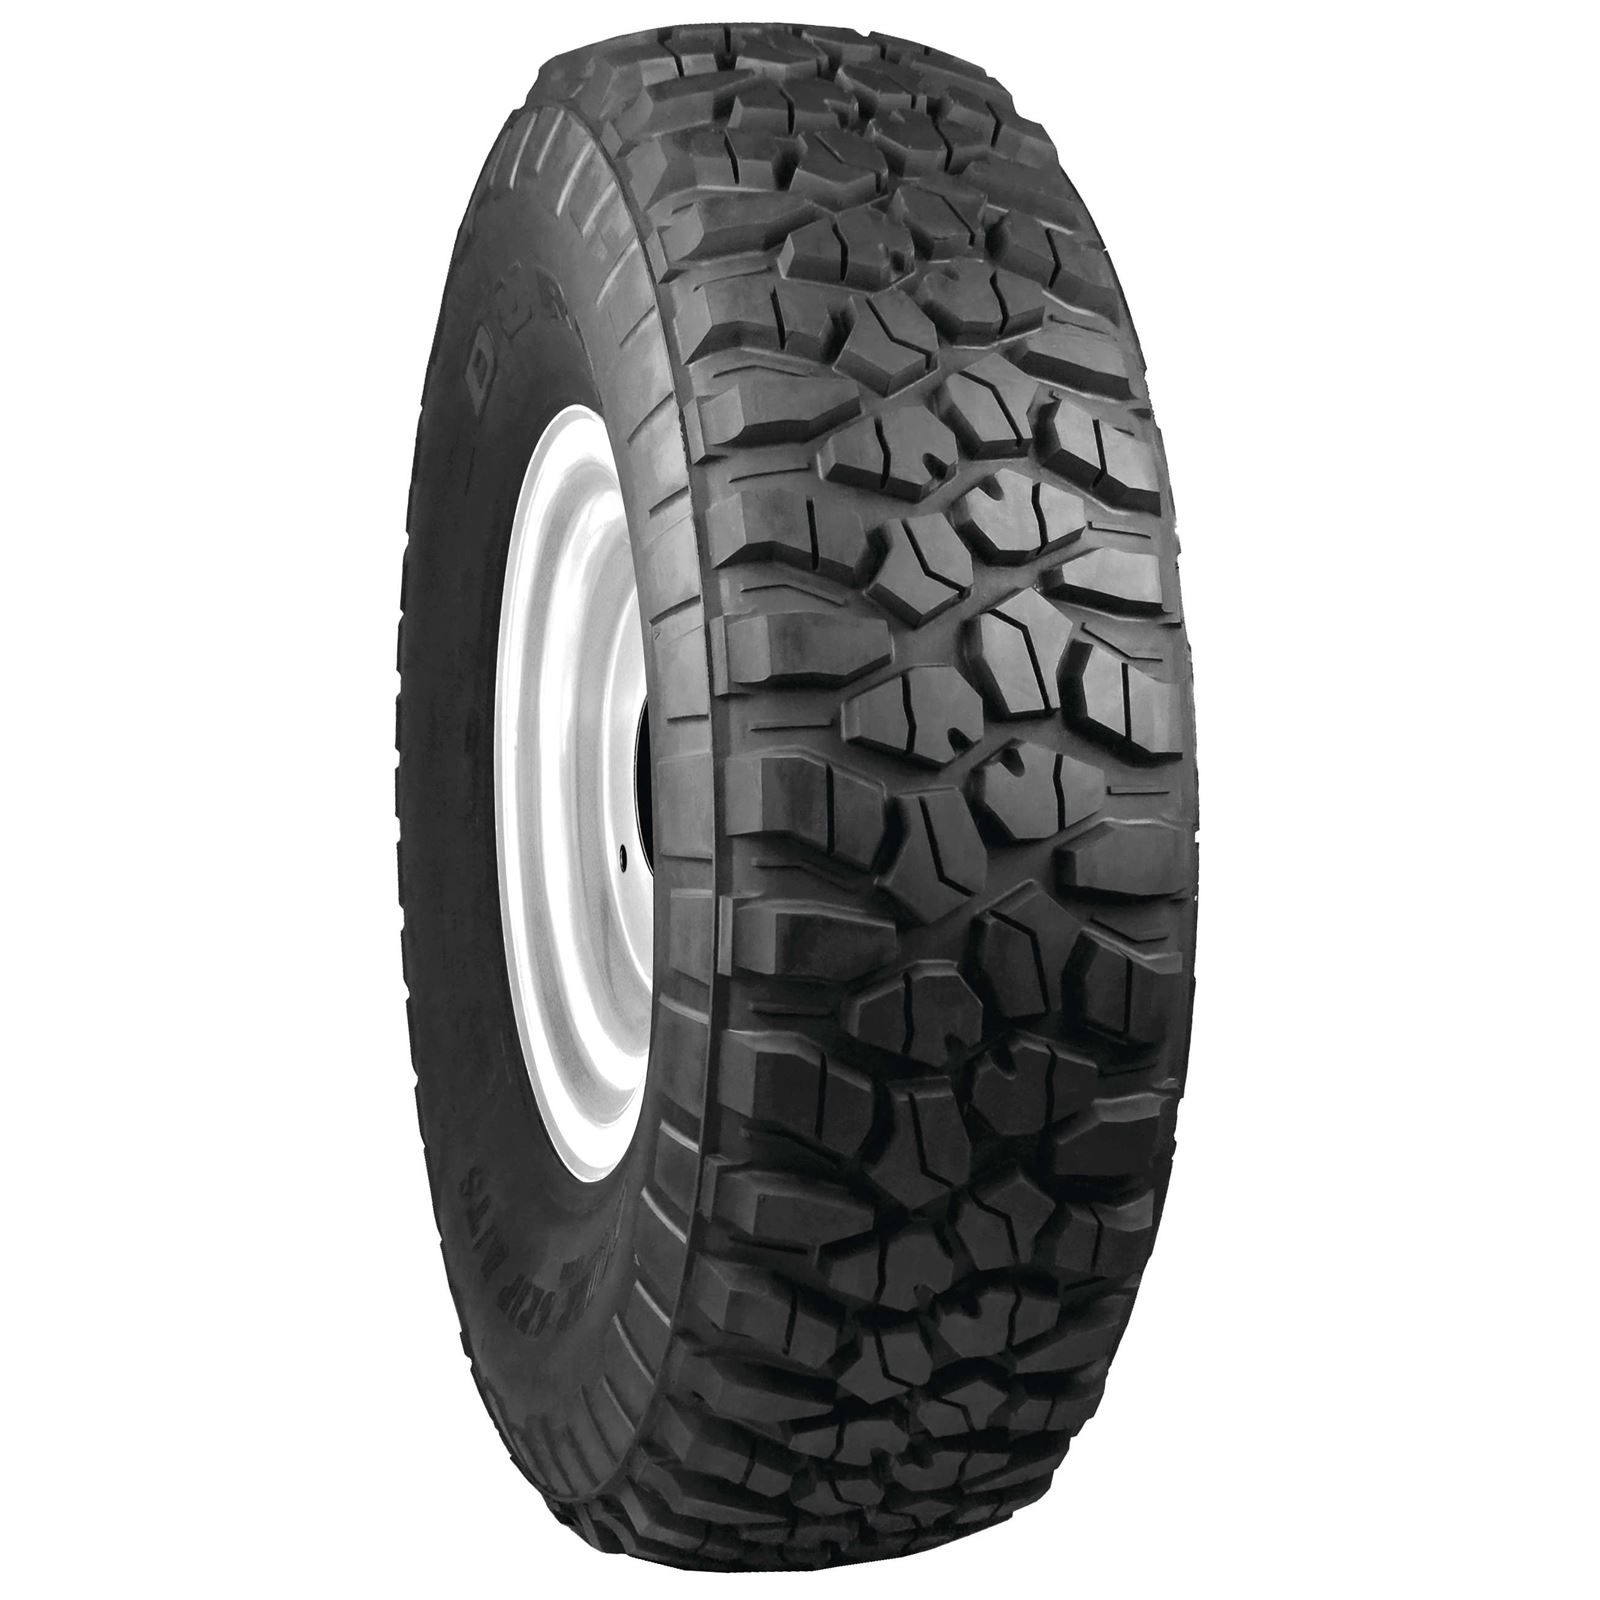 Duro Tire Power Grip DI2042 M/T and M/T-S Radial Tires 30x10R-15, Radial, Front/Rear, 8 Ply